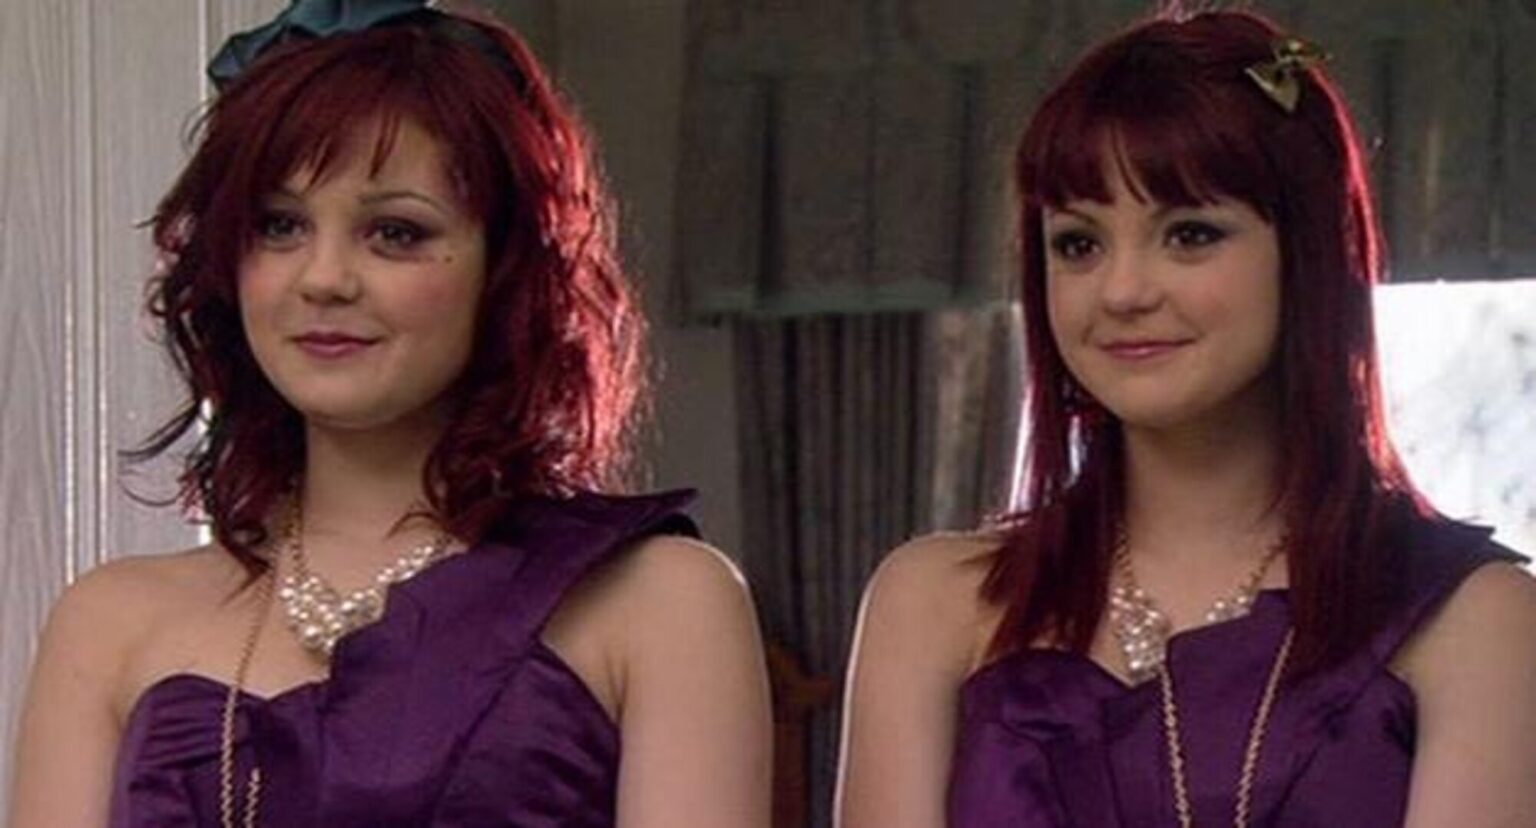 'Skins' star Kathryn Prescott has been in the hospital after a shocking incident. Find out what her twin sister Megan Prescott had to say here.